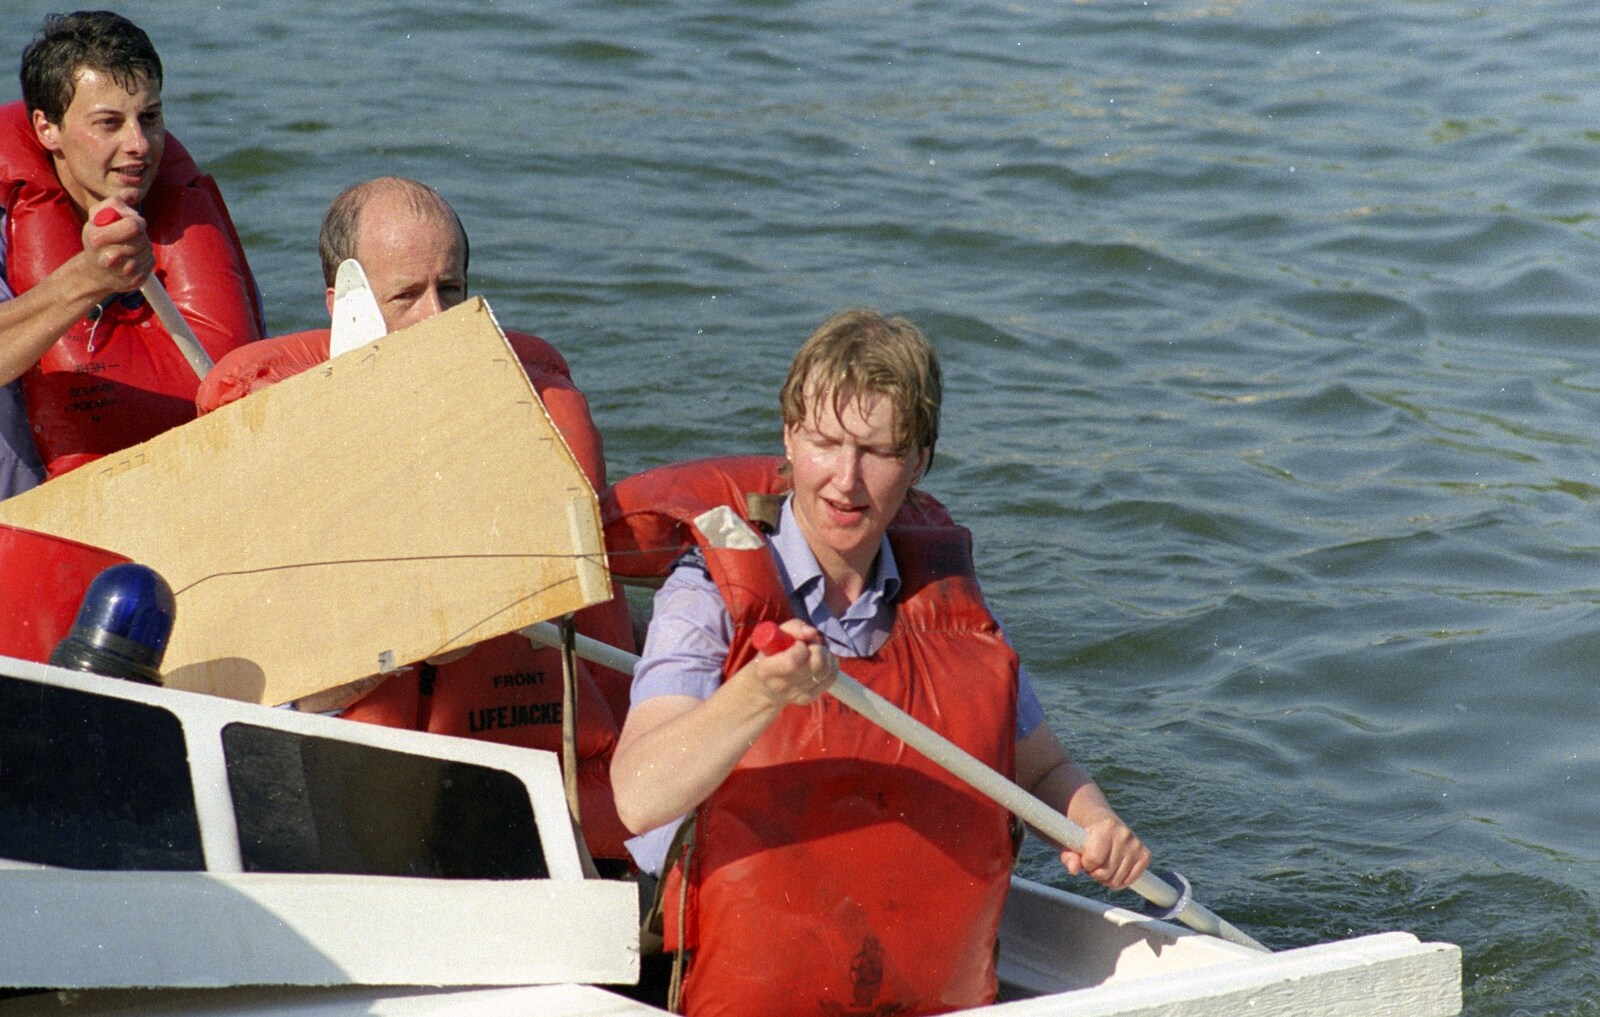 Jan looks a little wet from The Diss Raft Race, Diss Mere, Norfolk - 6th July 1991